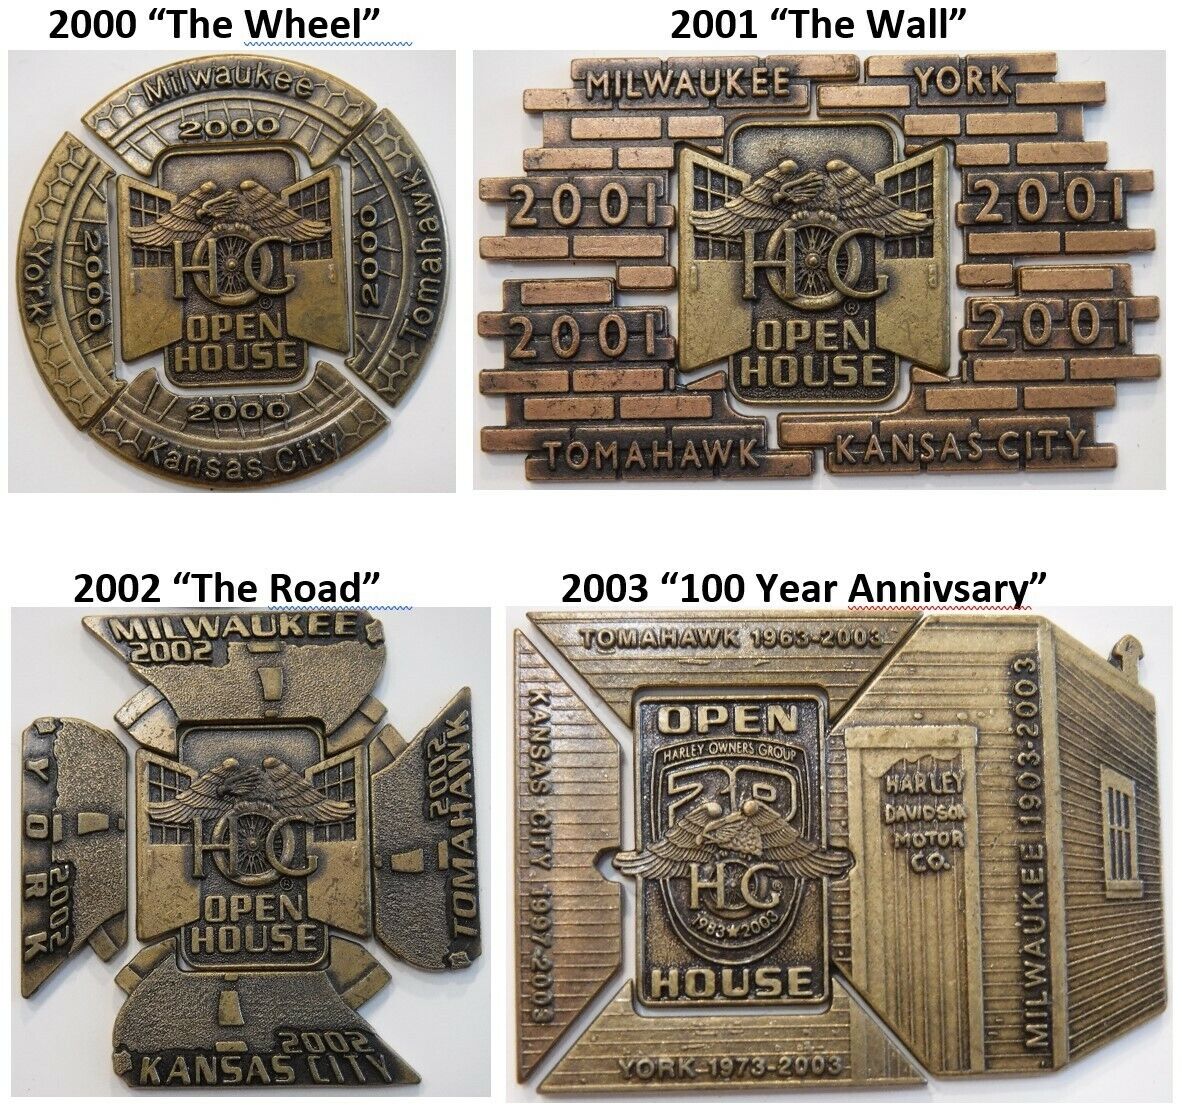 The Best of All (4) Harley Davidson Open House Pin Sets 2000, 2001, 2002, & 2003